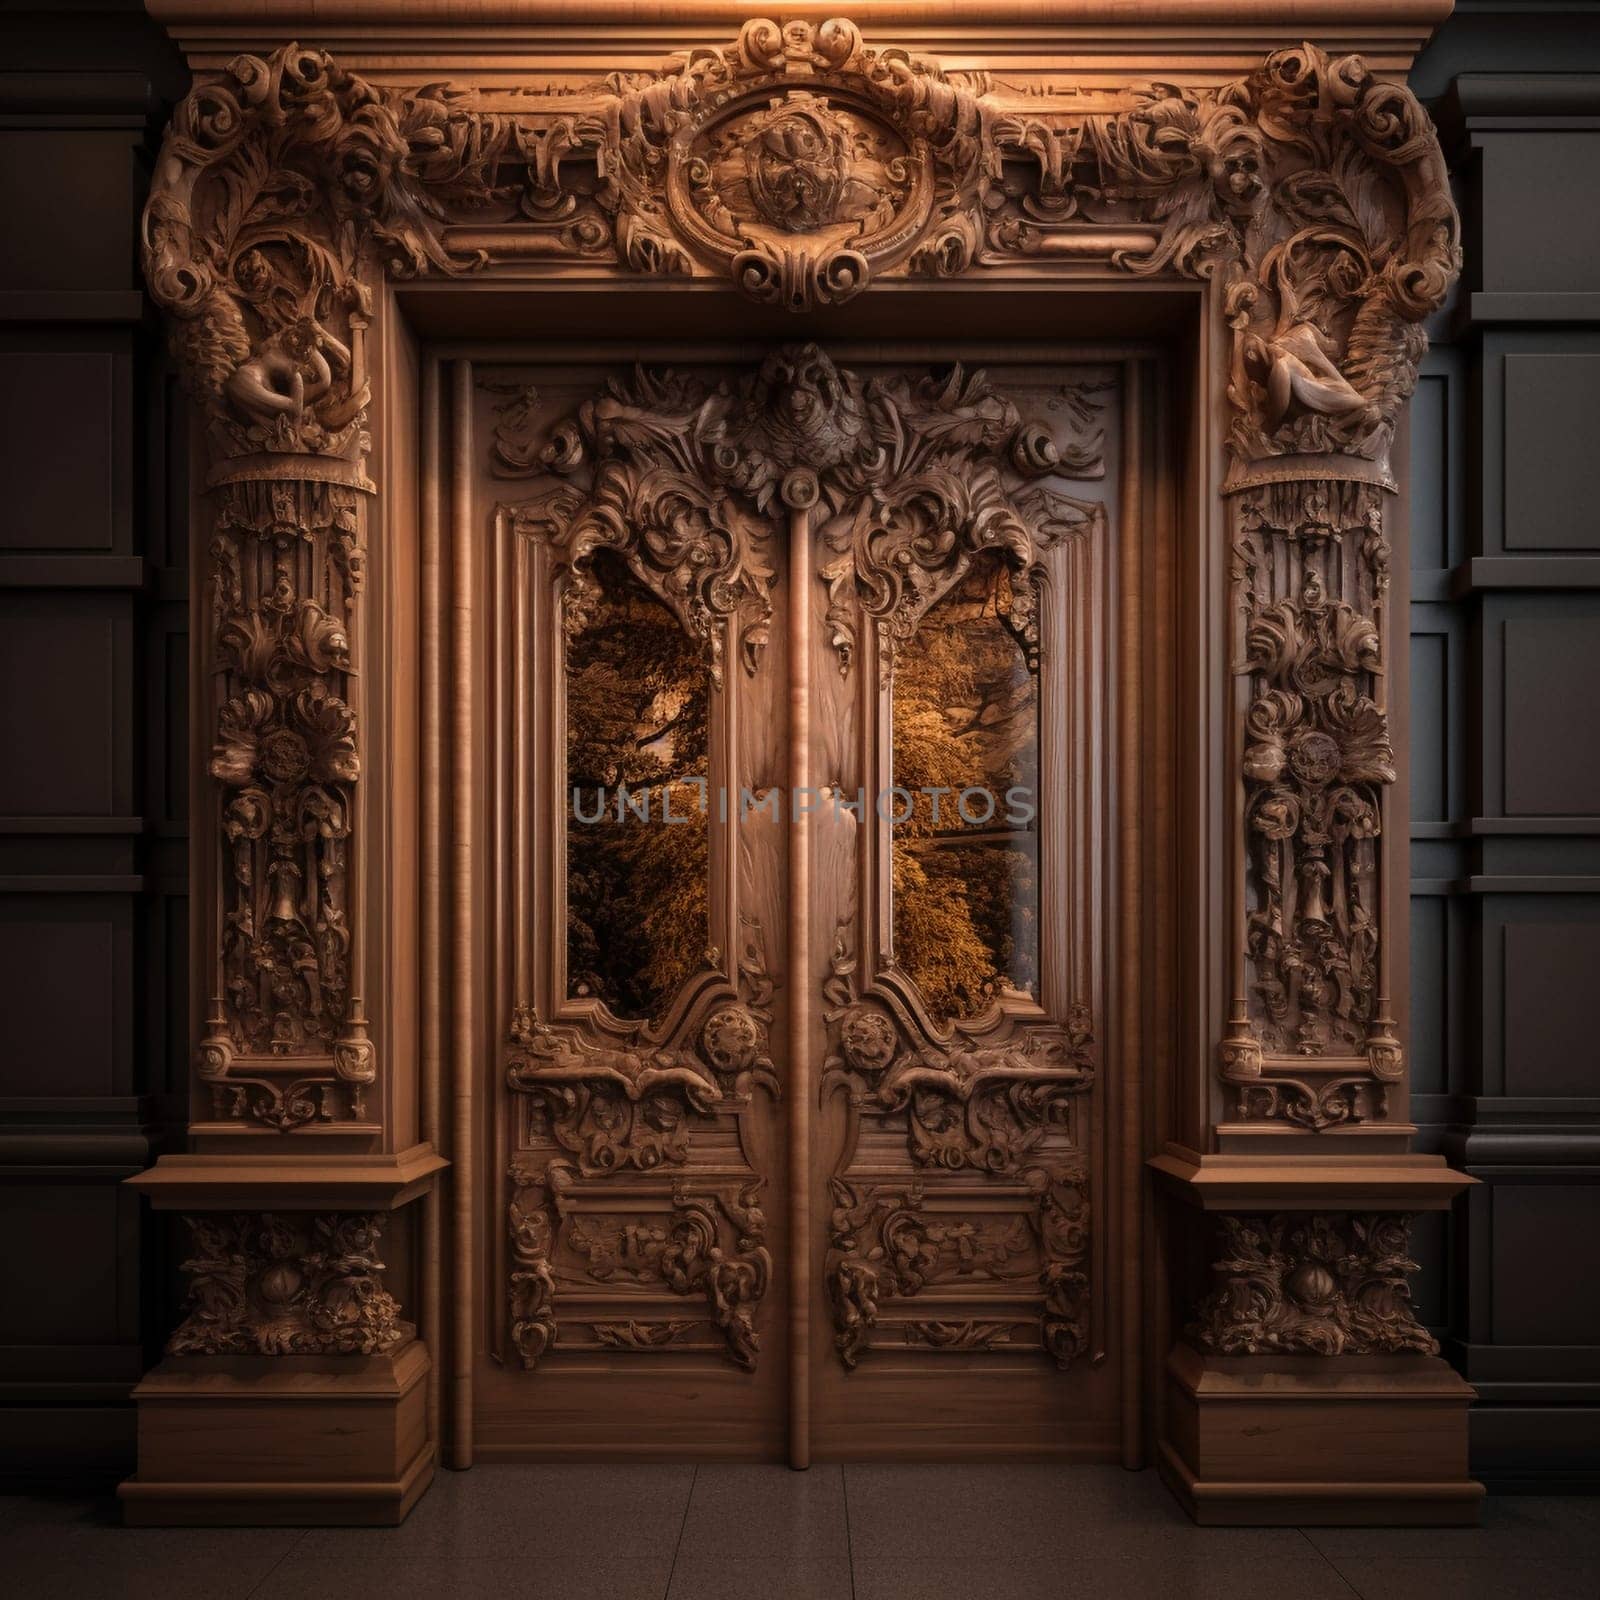 The Importance of Woodcarving in Creating Ornate and Decorative Wooden Doors and Windows by Sahin